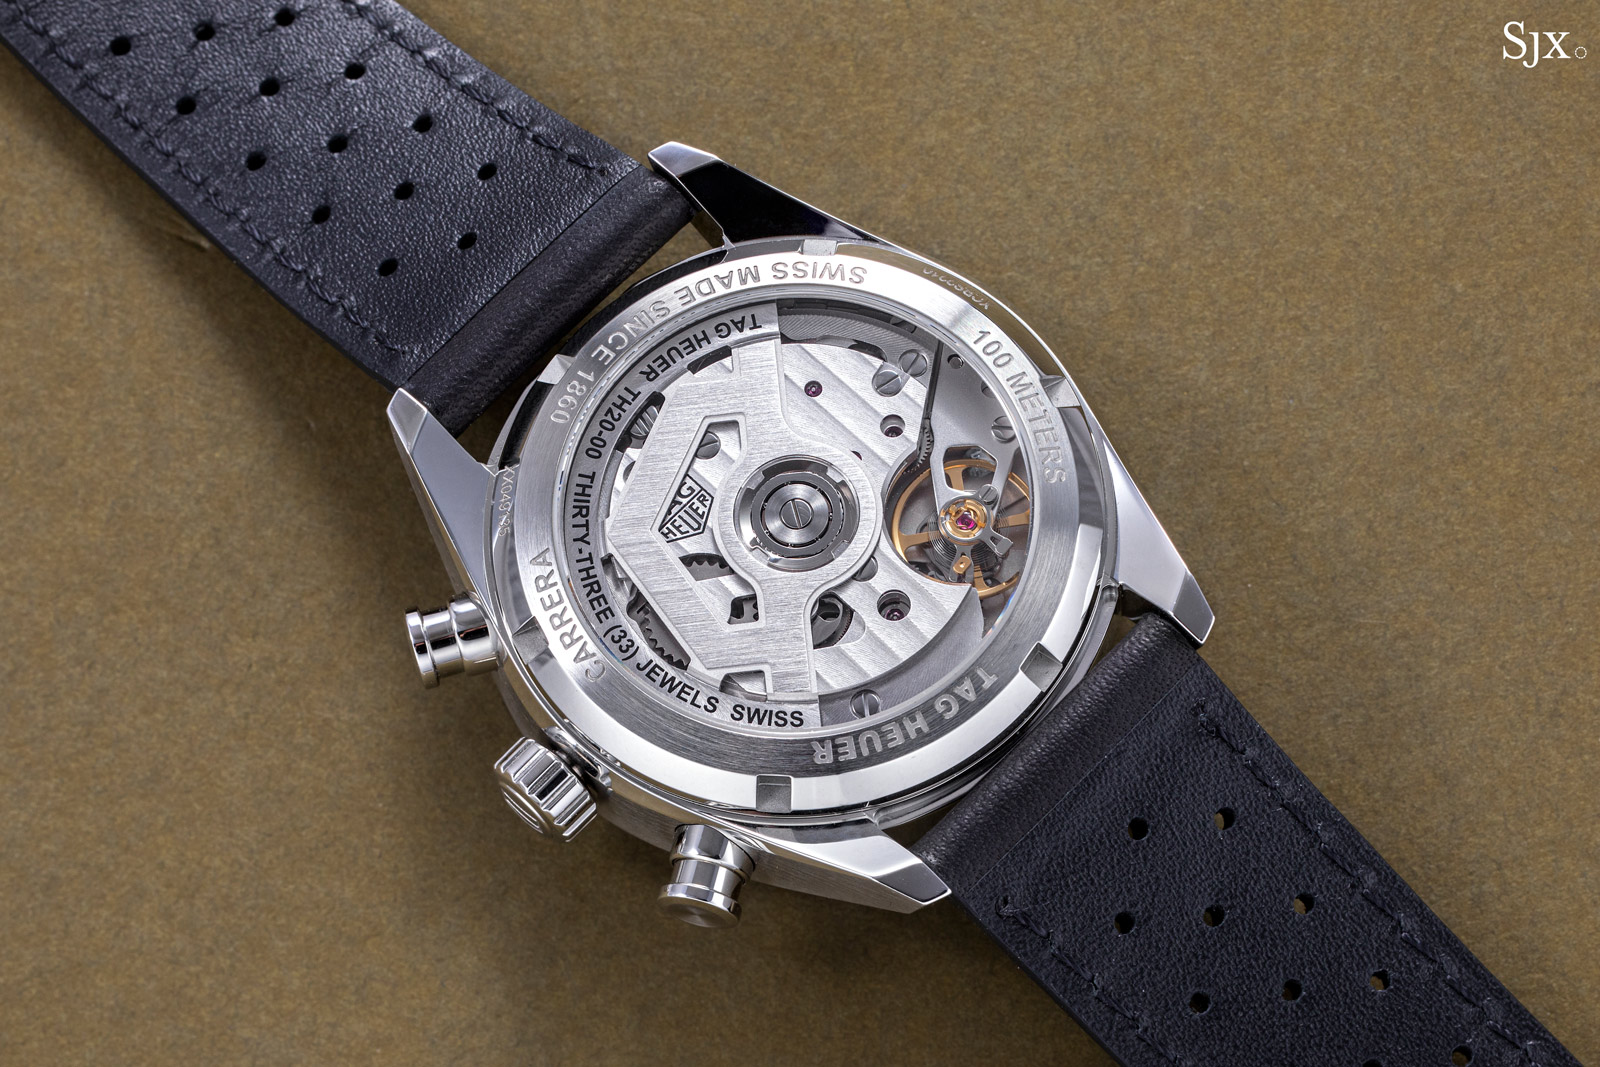 IN-DEPTH: The TAG Heuer Carrera Collection, powered by a movement